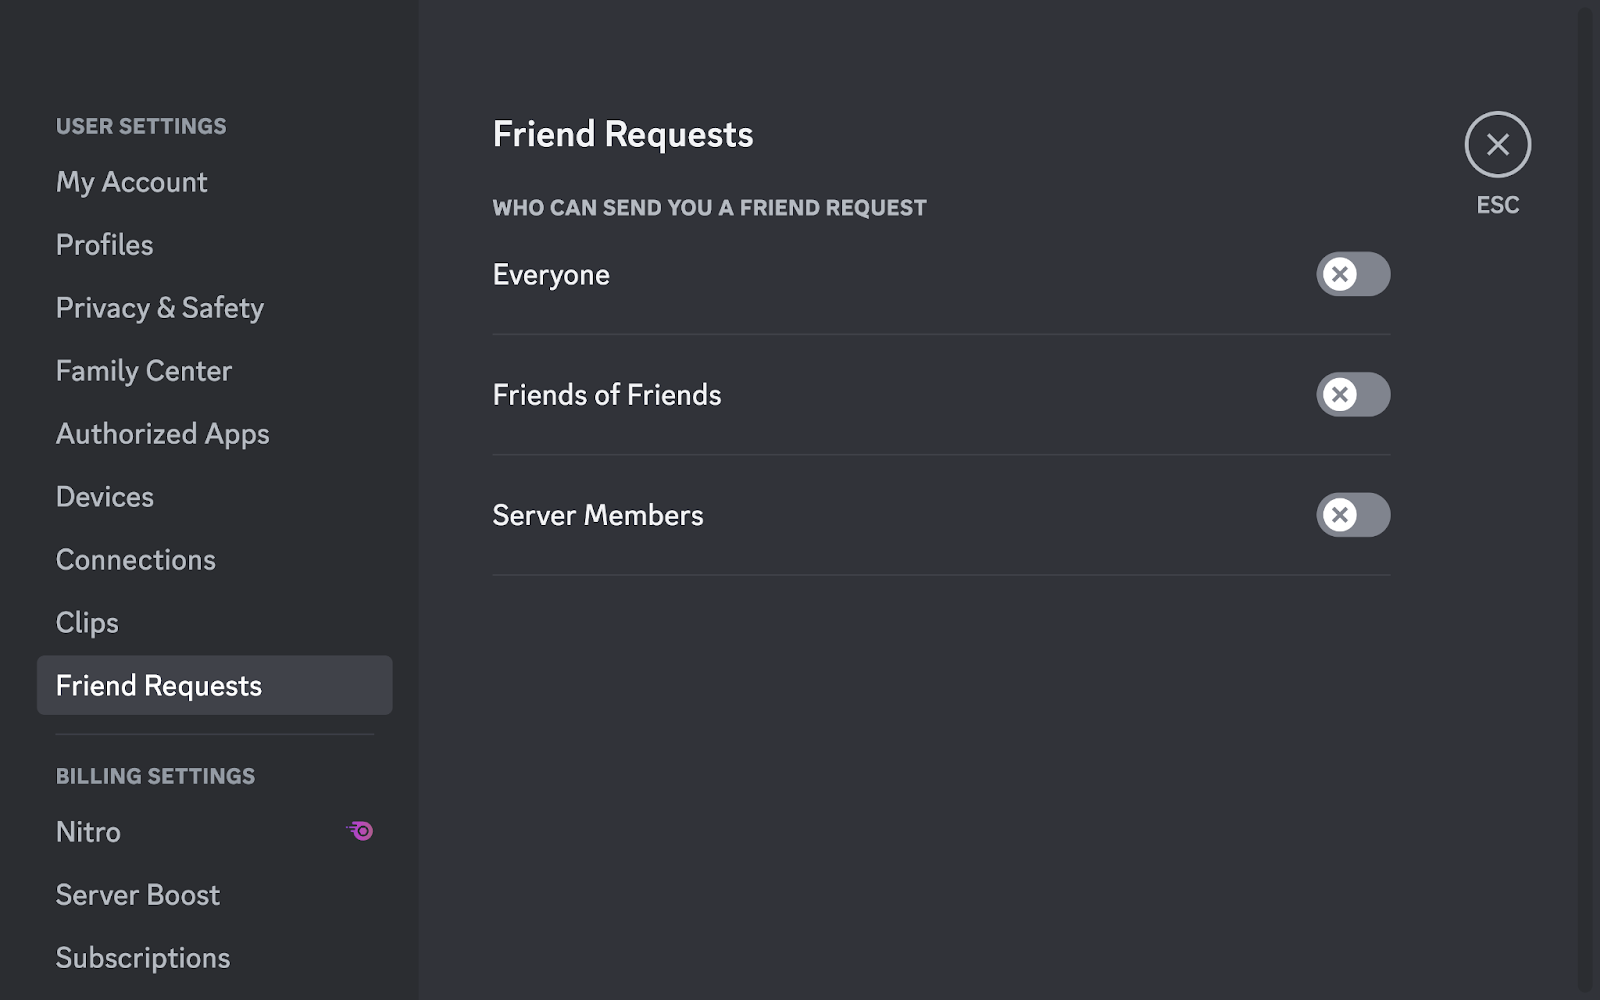 The Friend Requests menu in User Settings. Toggles for allowing “Everyone,” “Friends of Friends,” or “Server Members” to send the user a friend request are shown. 